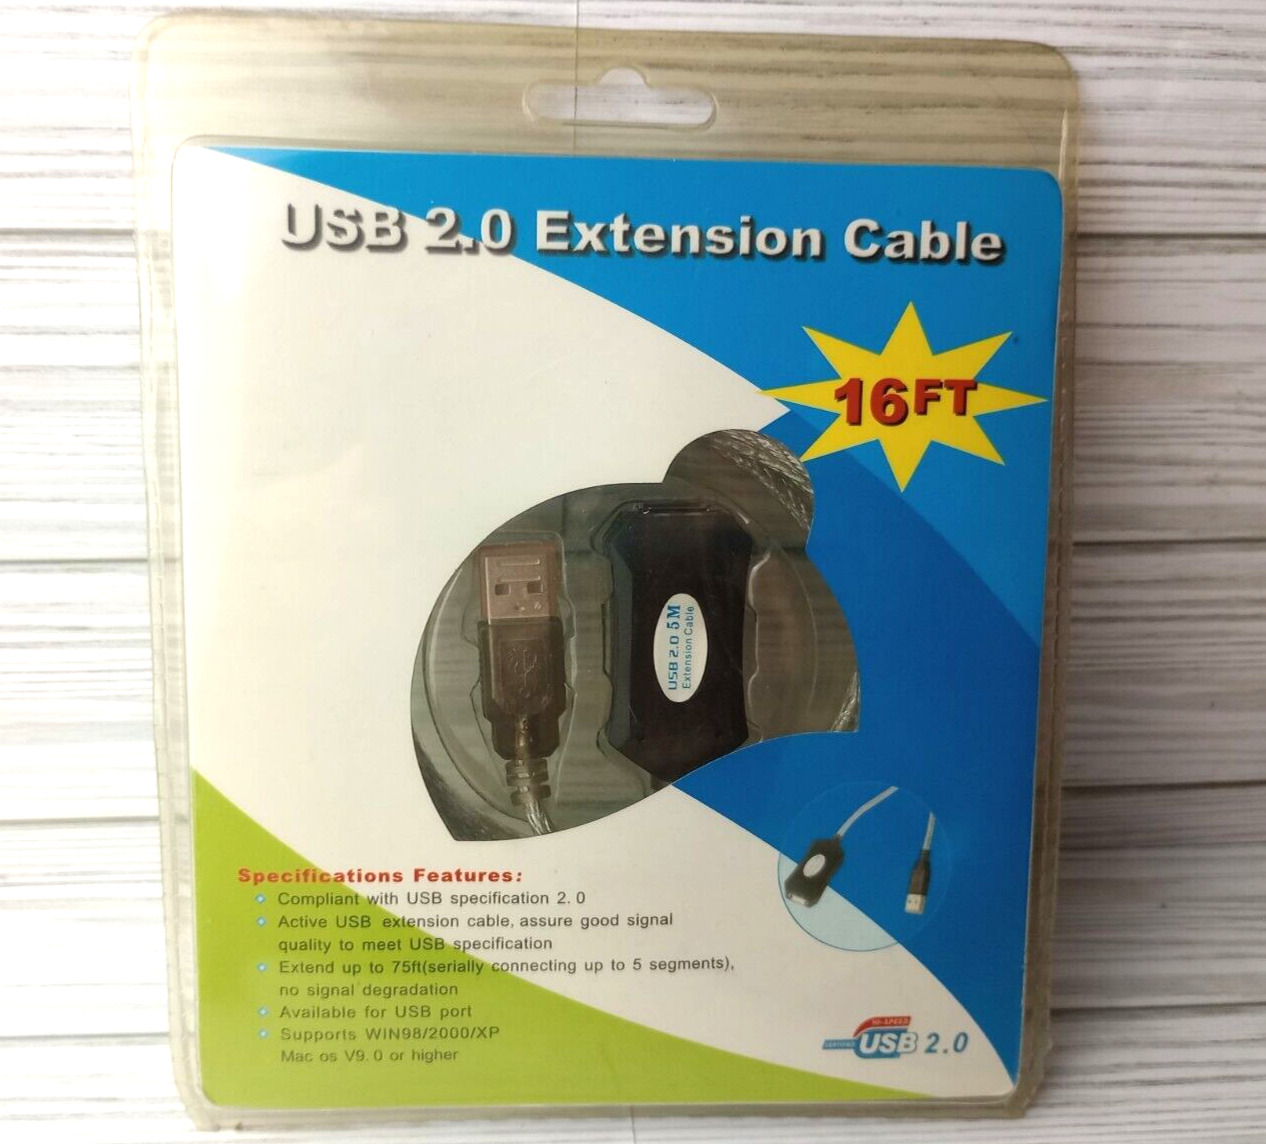 USB 2.0 Extension Cable 16 FT Hi-Speed NEW Vintage